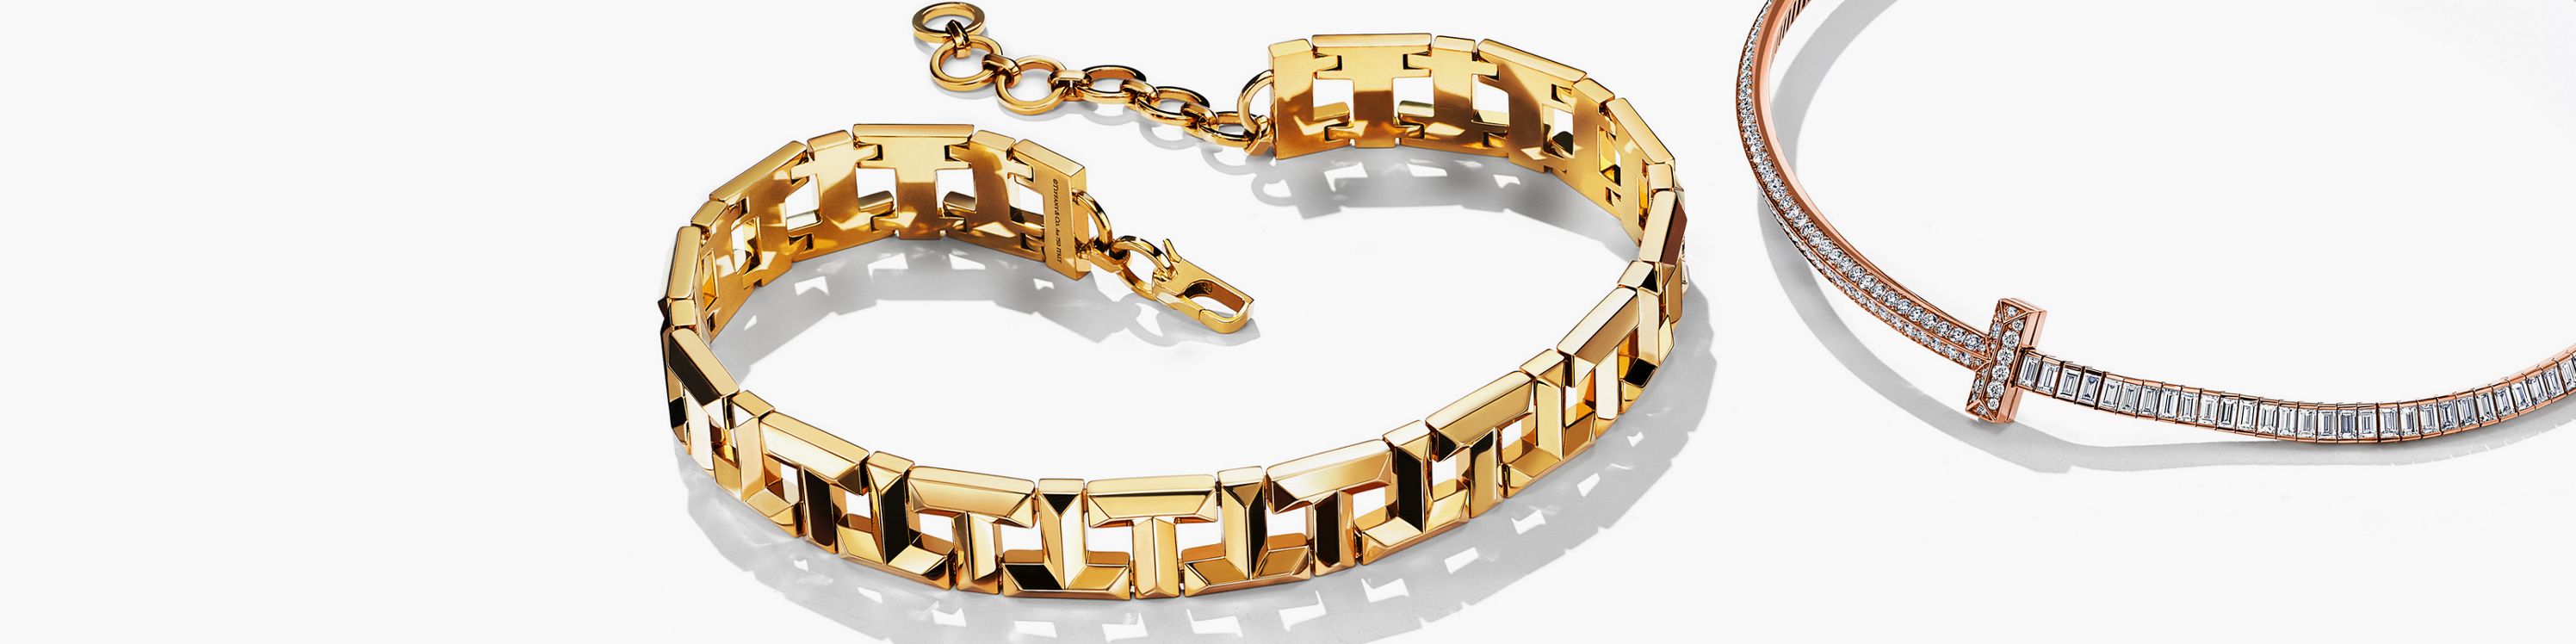 Tiffany HardWear Bold Graduated Link Necklace in Yellow Gold